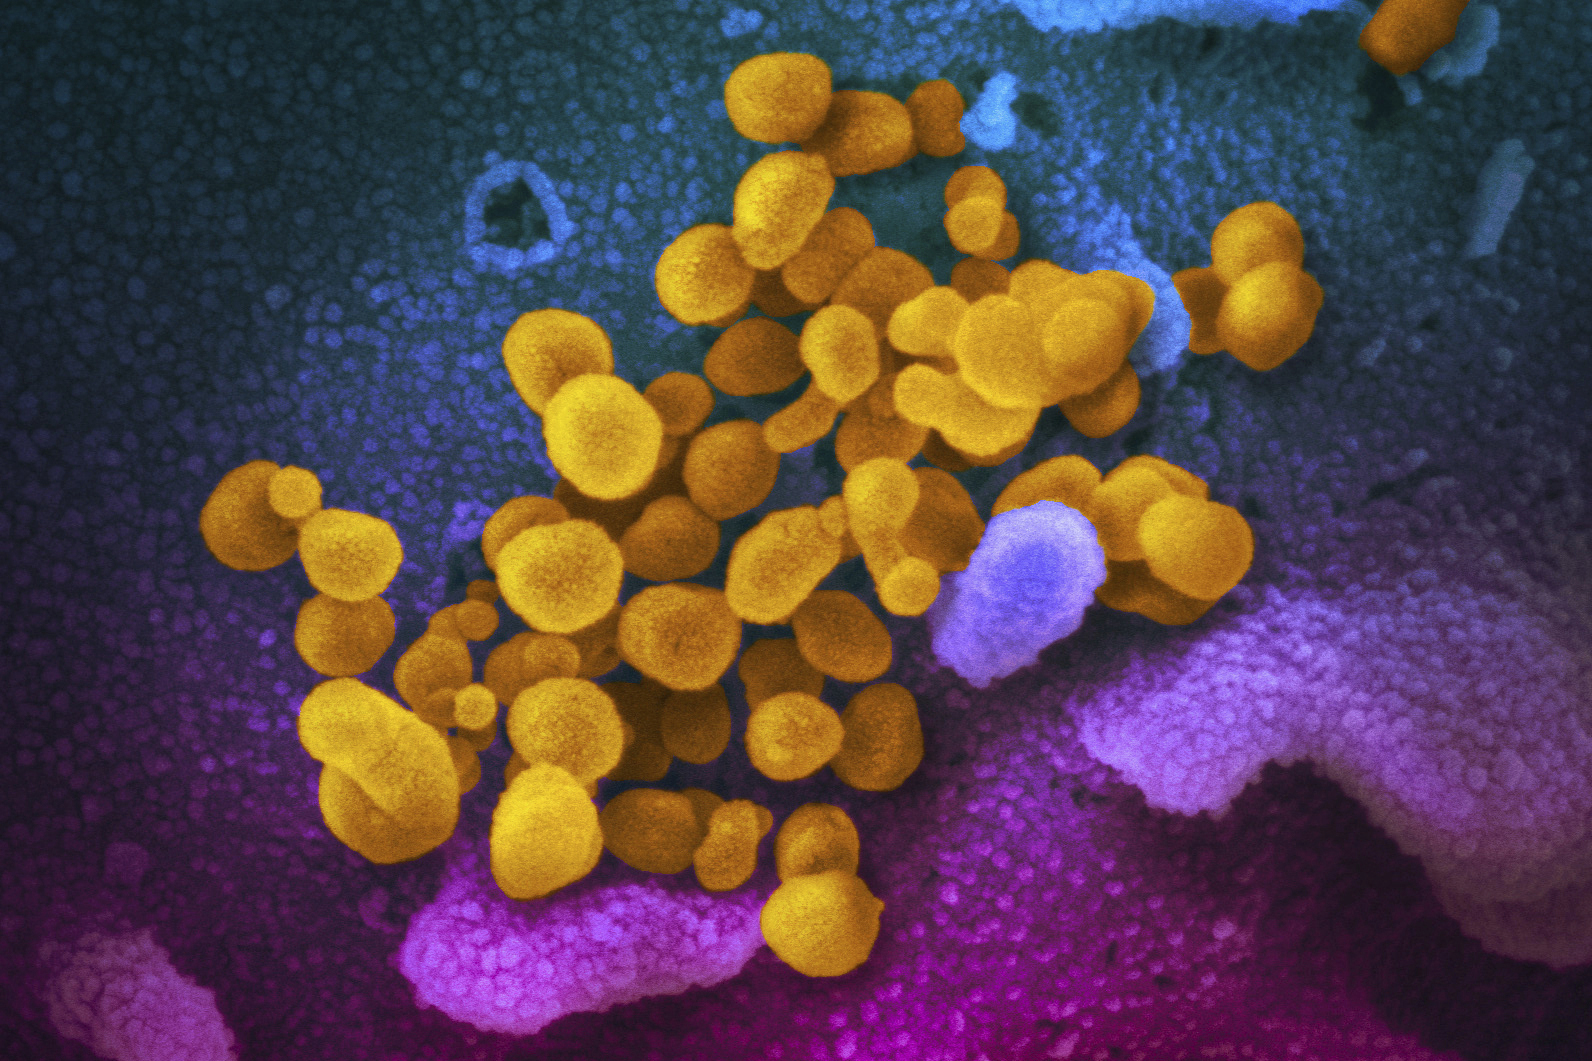 FILE - This undated, colorized electron microscope image made available by the U.S. National Institutes of Health in February 2020 shows the Novel Coronavirus SARS-CoV-2, indicated in yellow, emerging from the surface of cells, indicated in blue/pink, cultured in a laboratory. The sample was isolated from a patient in the U.S. There’s less risk of getting long COVID in the omicron era than in the pandemic’s earlier waves, according to a study of nearly 10,000 Americans that aims to help scientists better understand the mysterious condition, published in JAMA on Thursday, May 25, 2023. (NIAID-RML via AP, File)